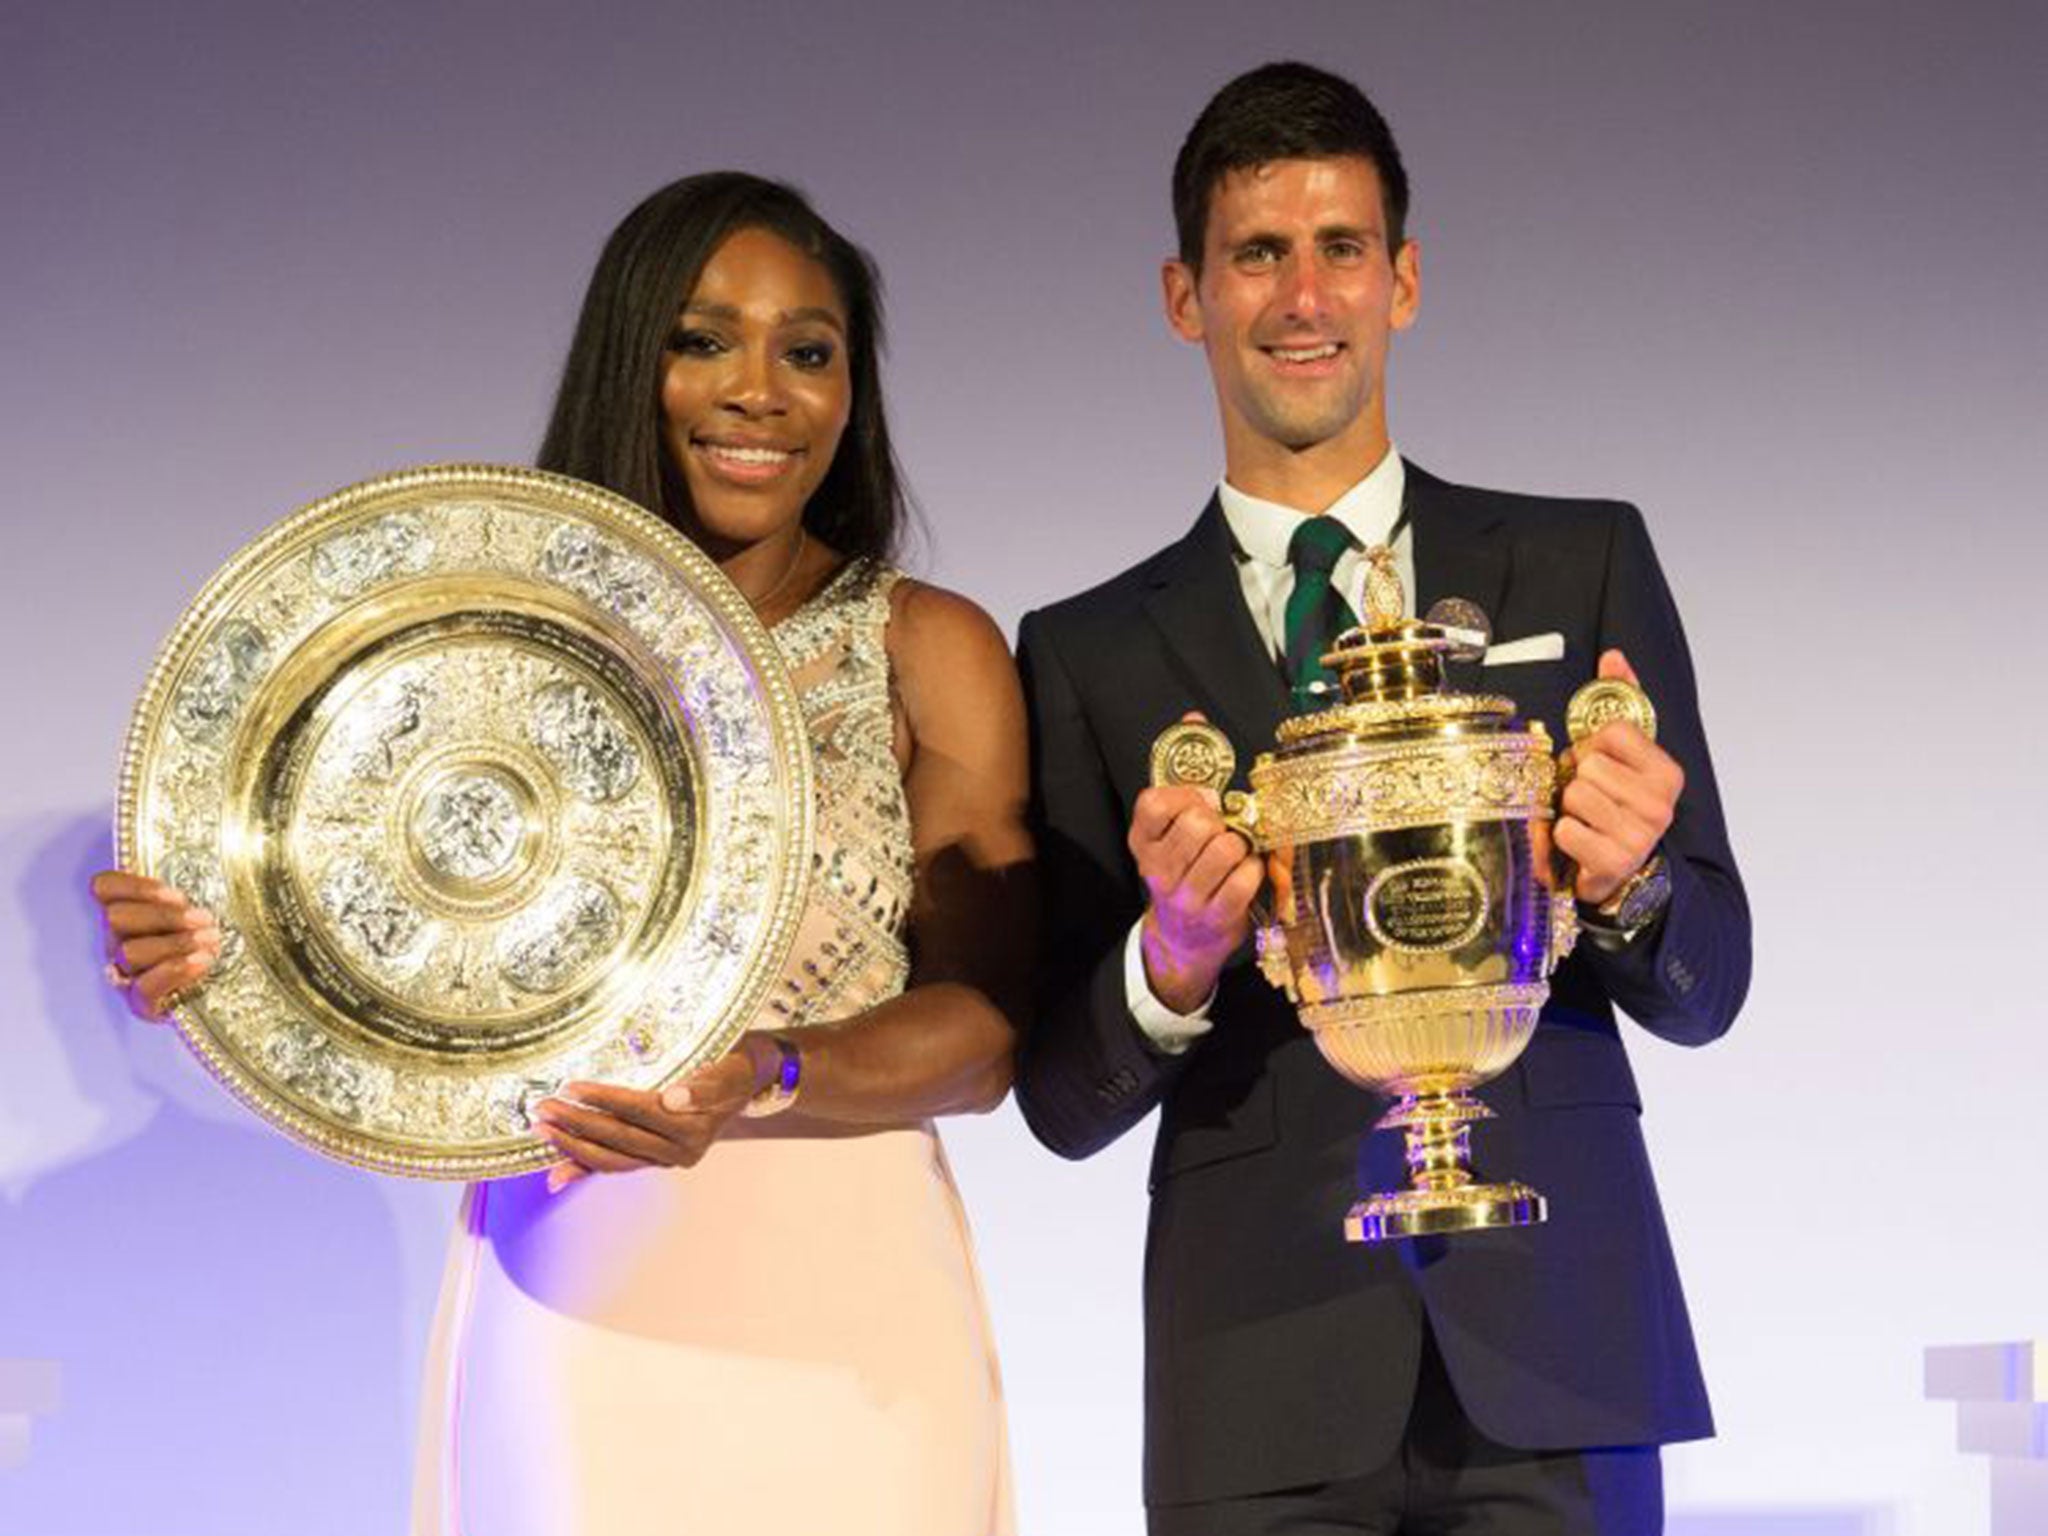 Novak Djokovic and Serena Williams after their victories at Wimbledon last year